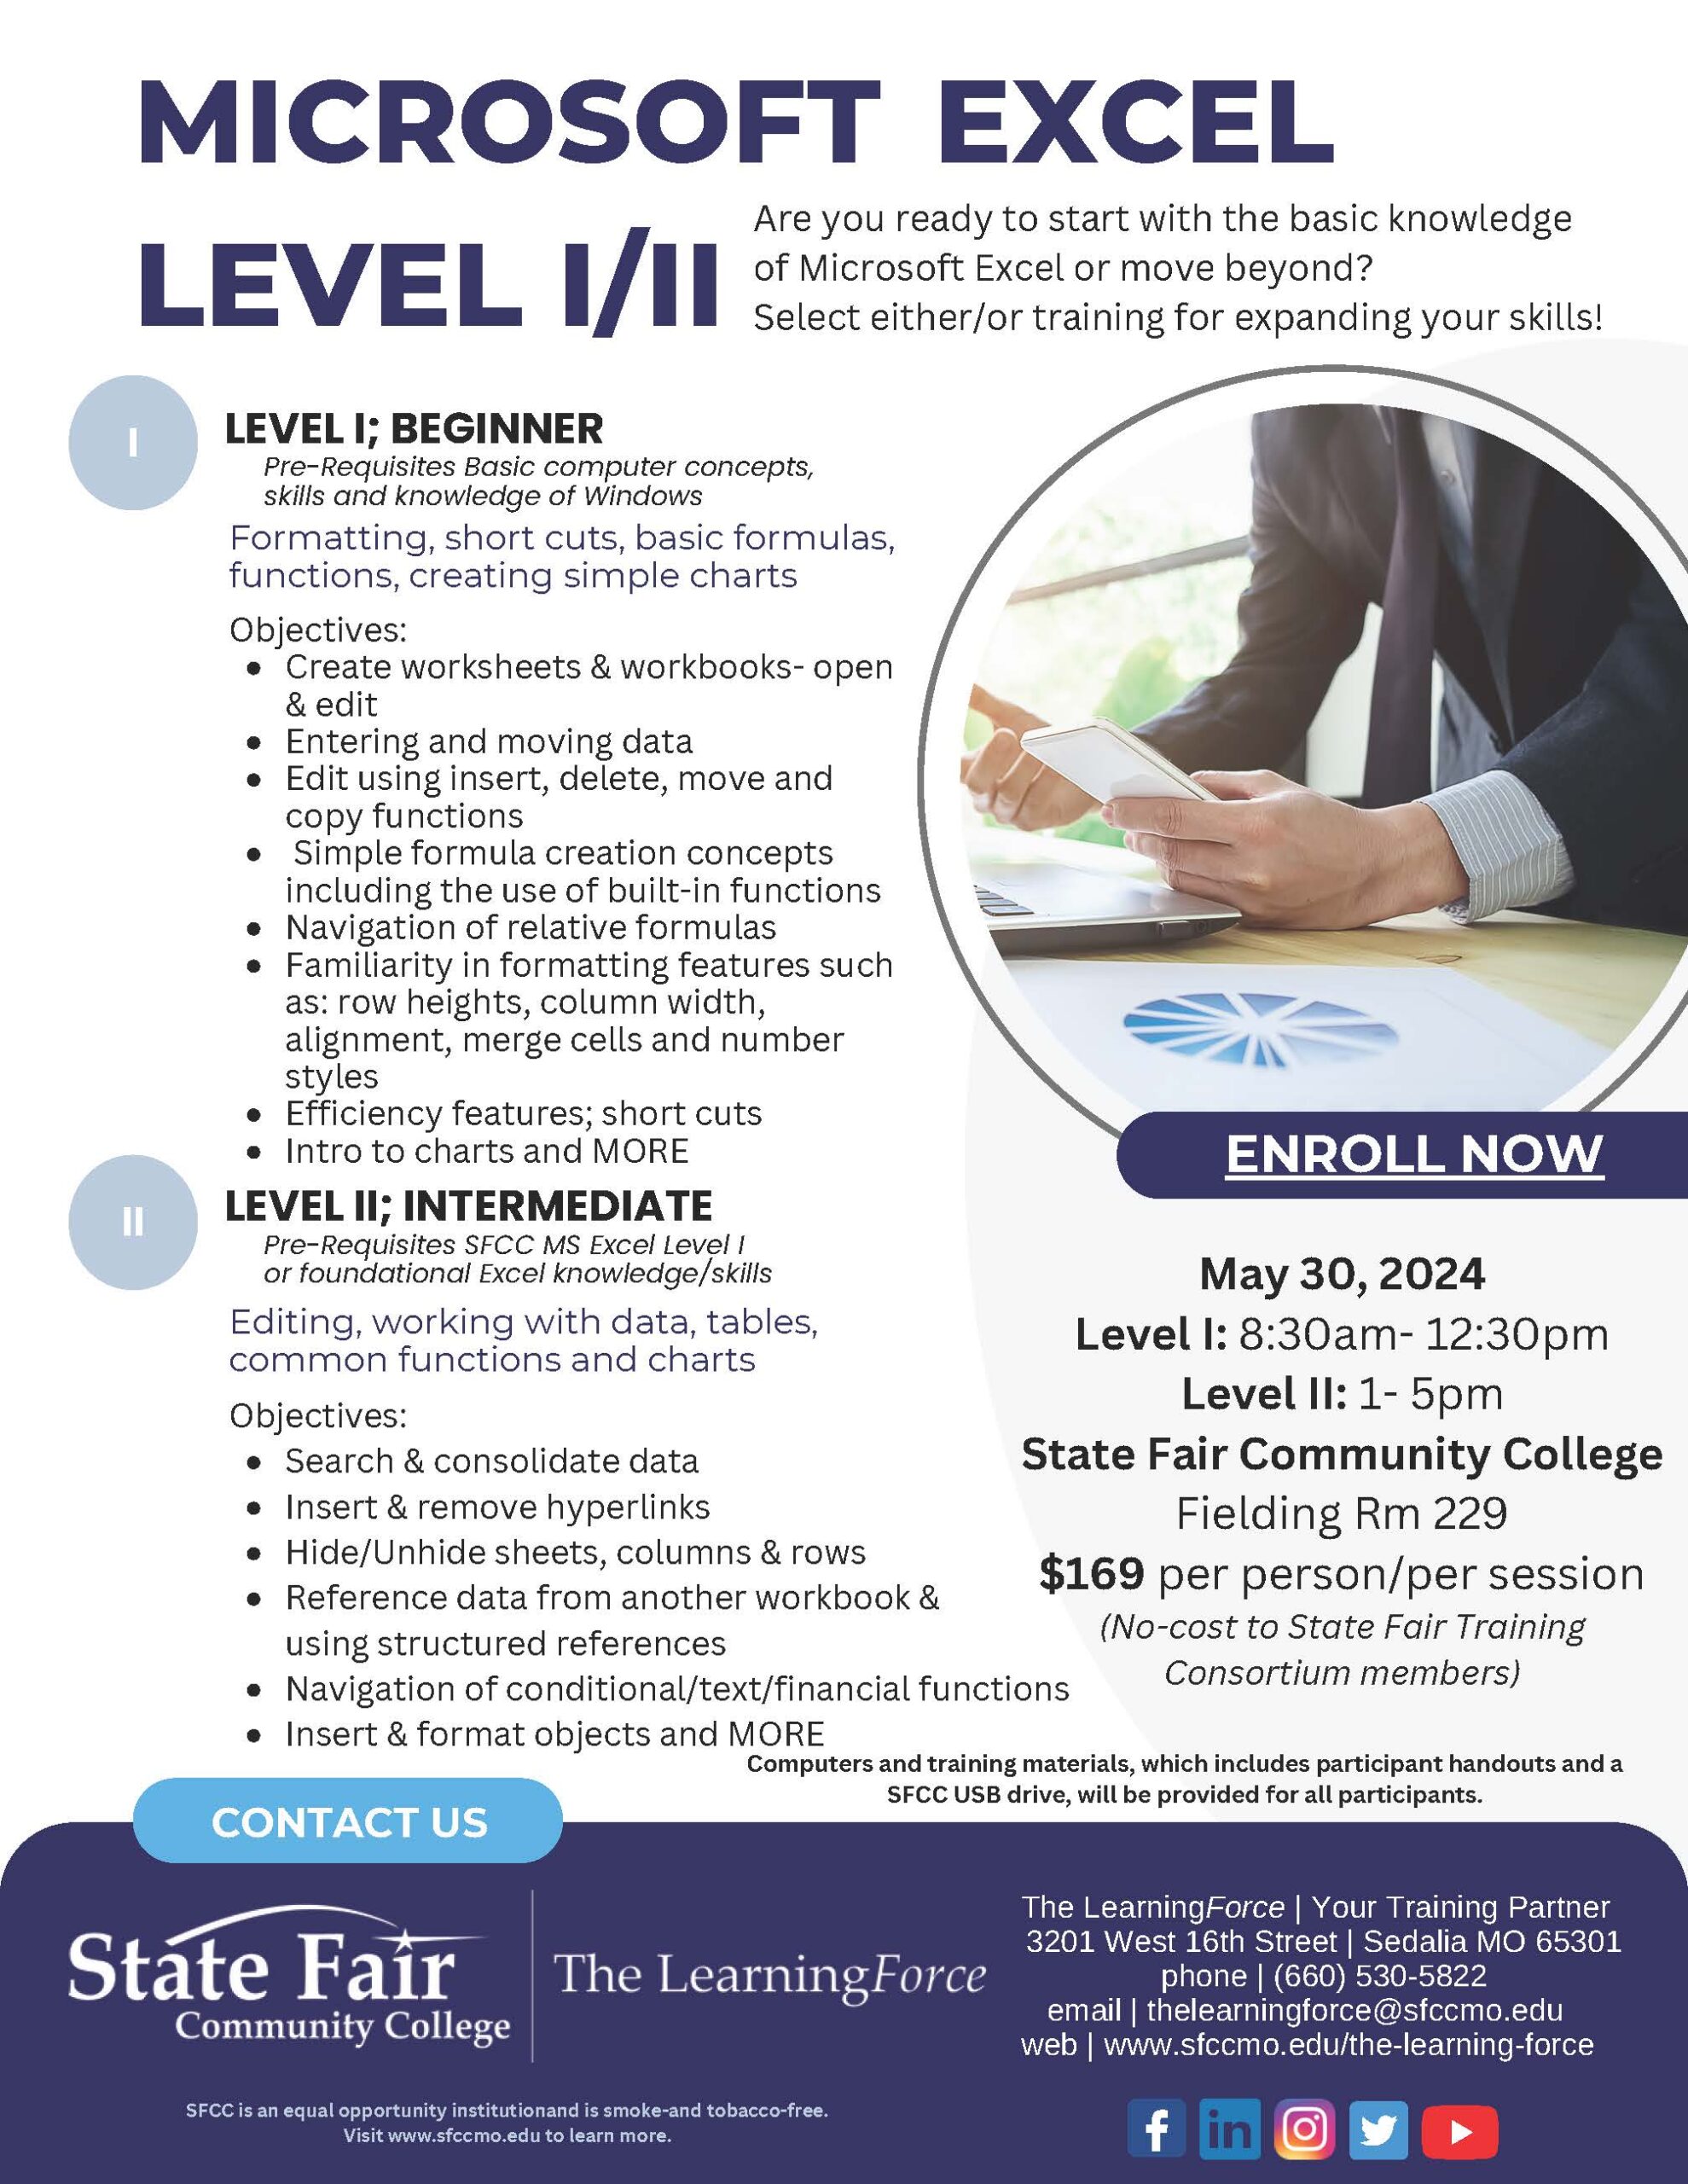 Read more about SFCC to offer Microsoft Excel Level I and II training